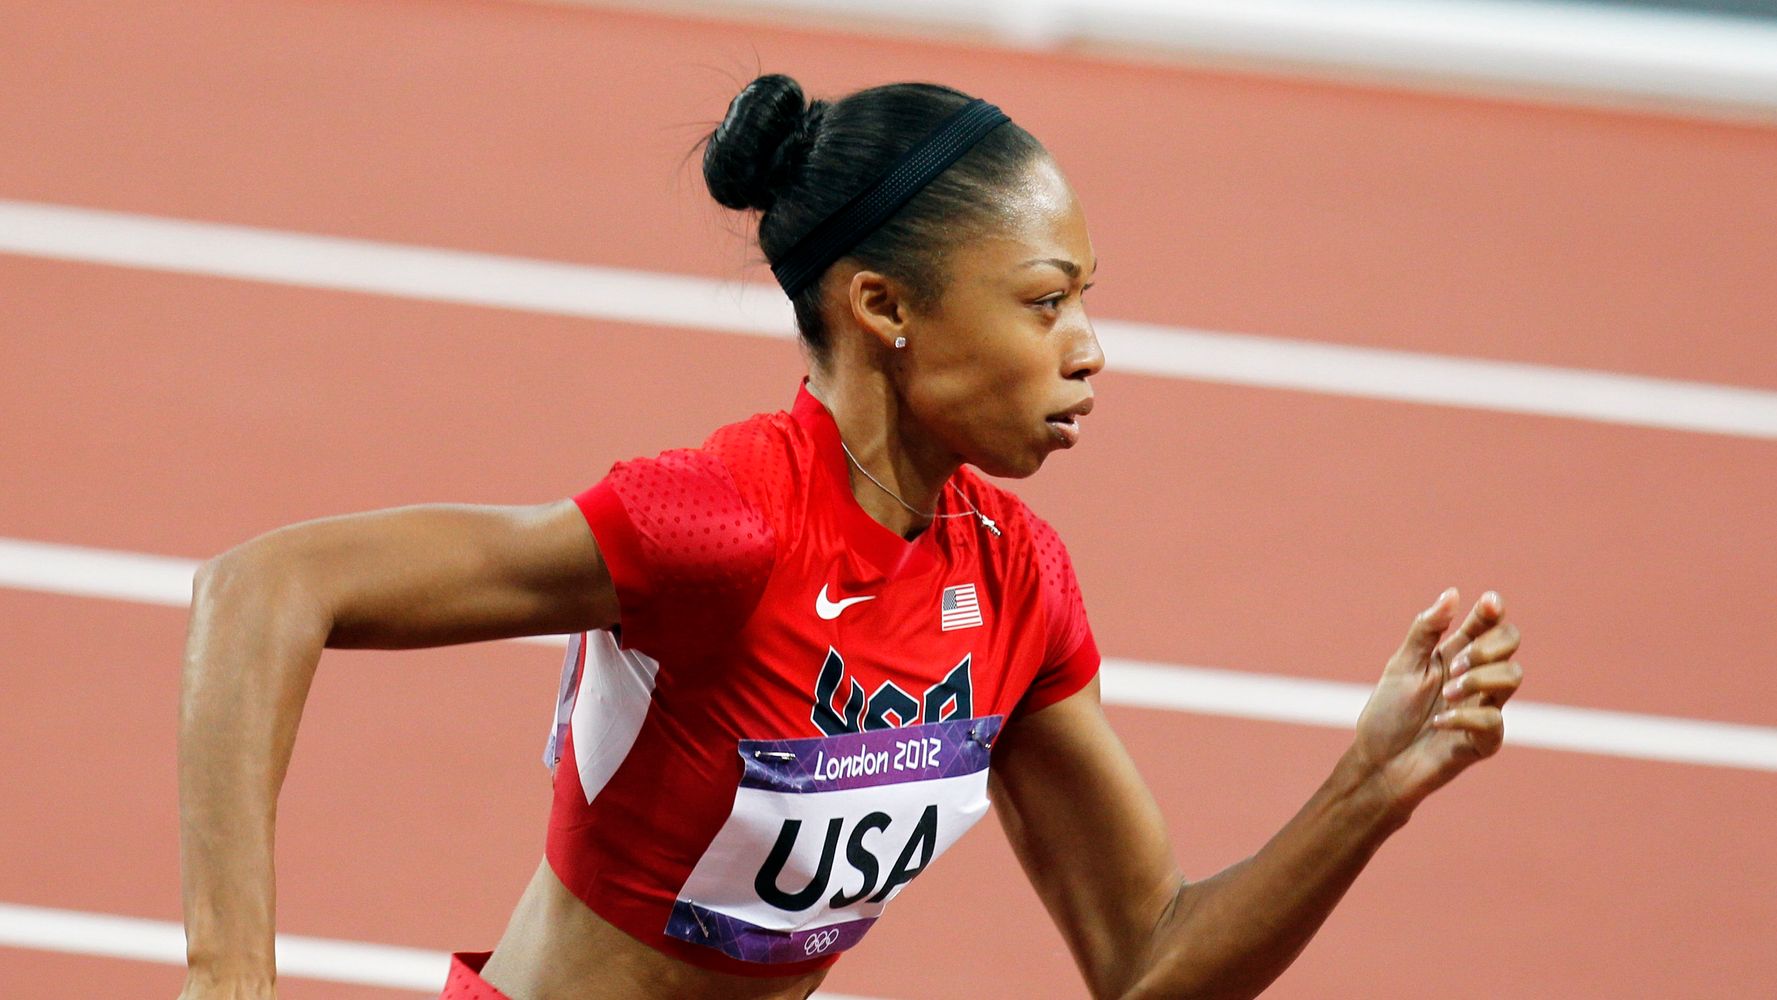 Life in the Fast Lane With Champion Sprinter and Peloton Member Allyson  Felix